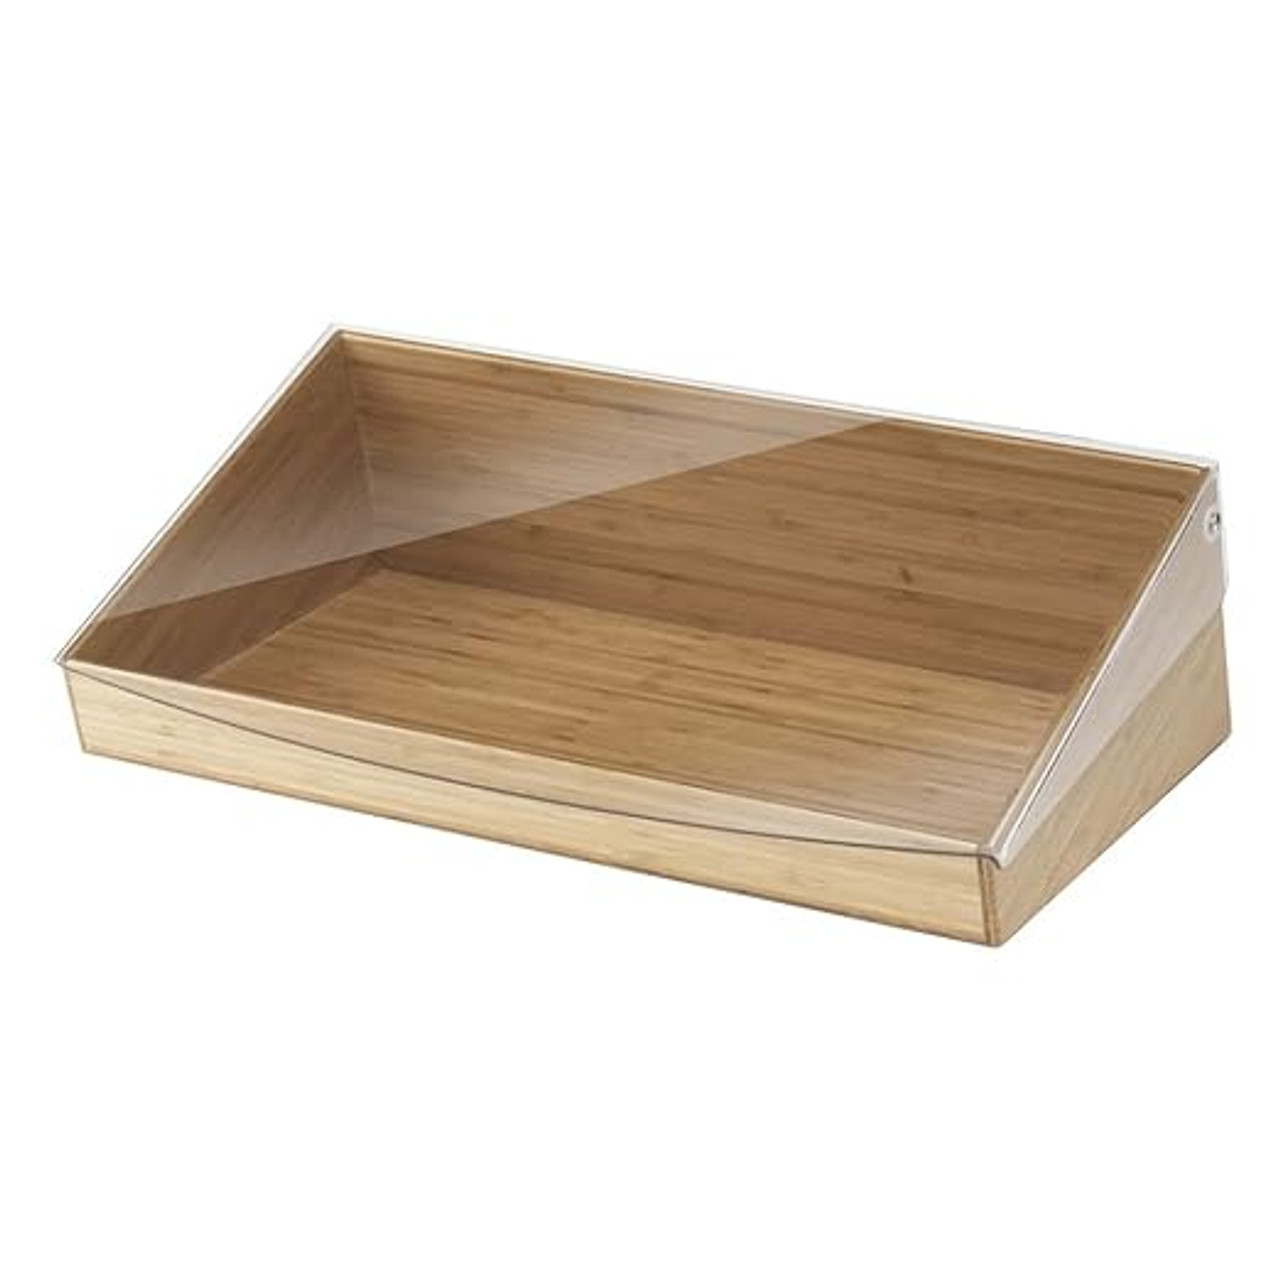 Cal-Mil Eco-Friendly 20" x 12" x 7" Bamboo Display Bin with Clear Lid-Chicken Pieces